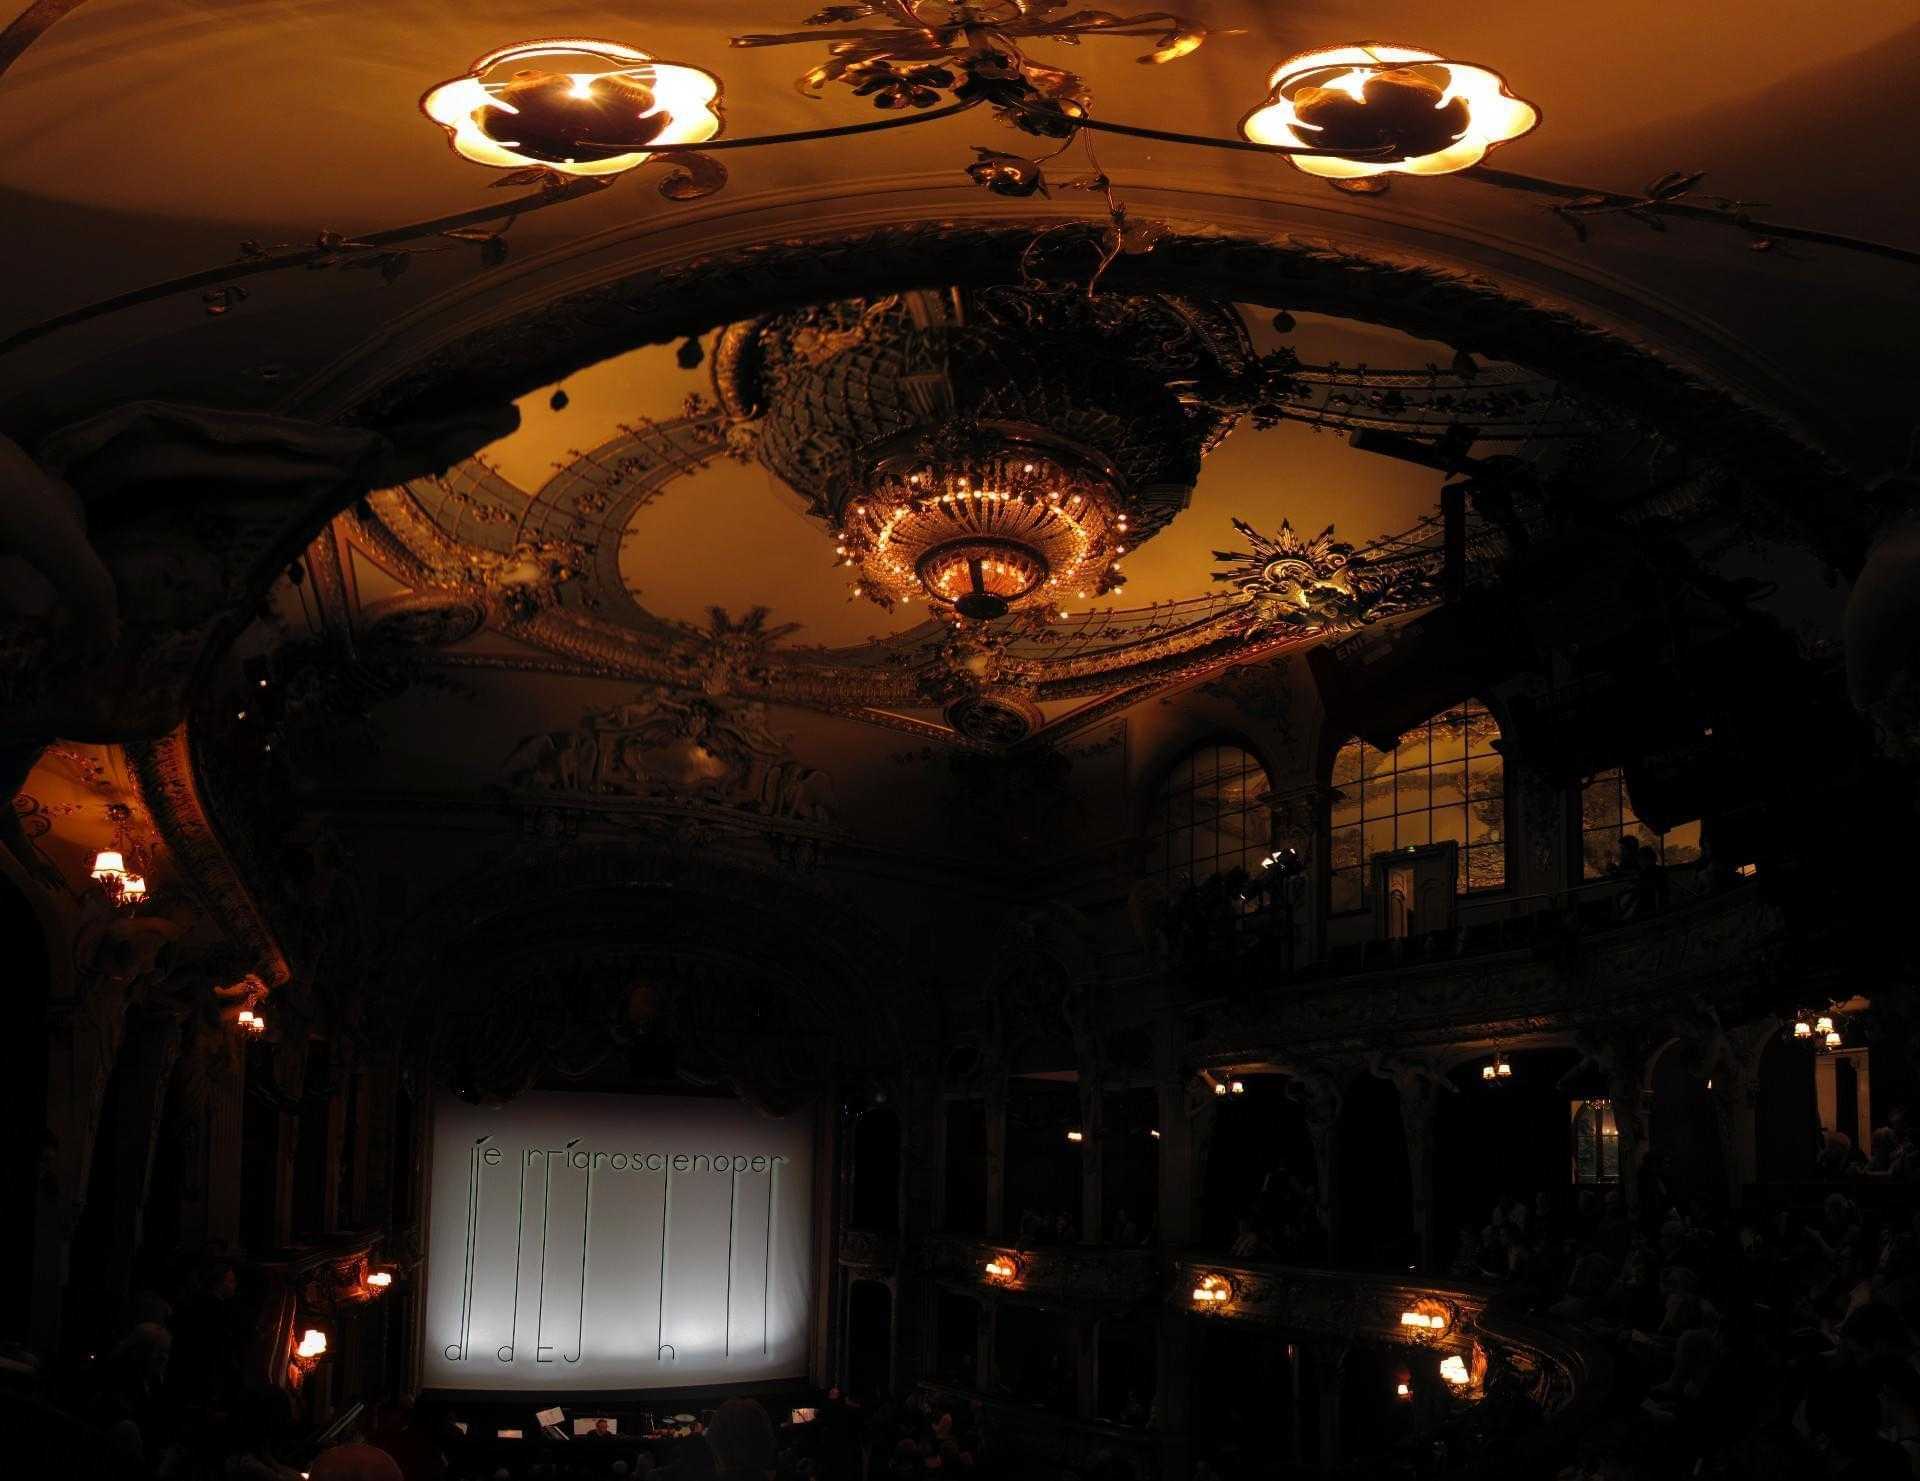 Berliner Ensemble theater playing The Threepenny Opera